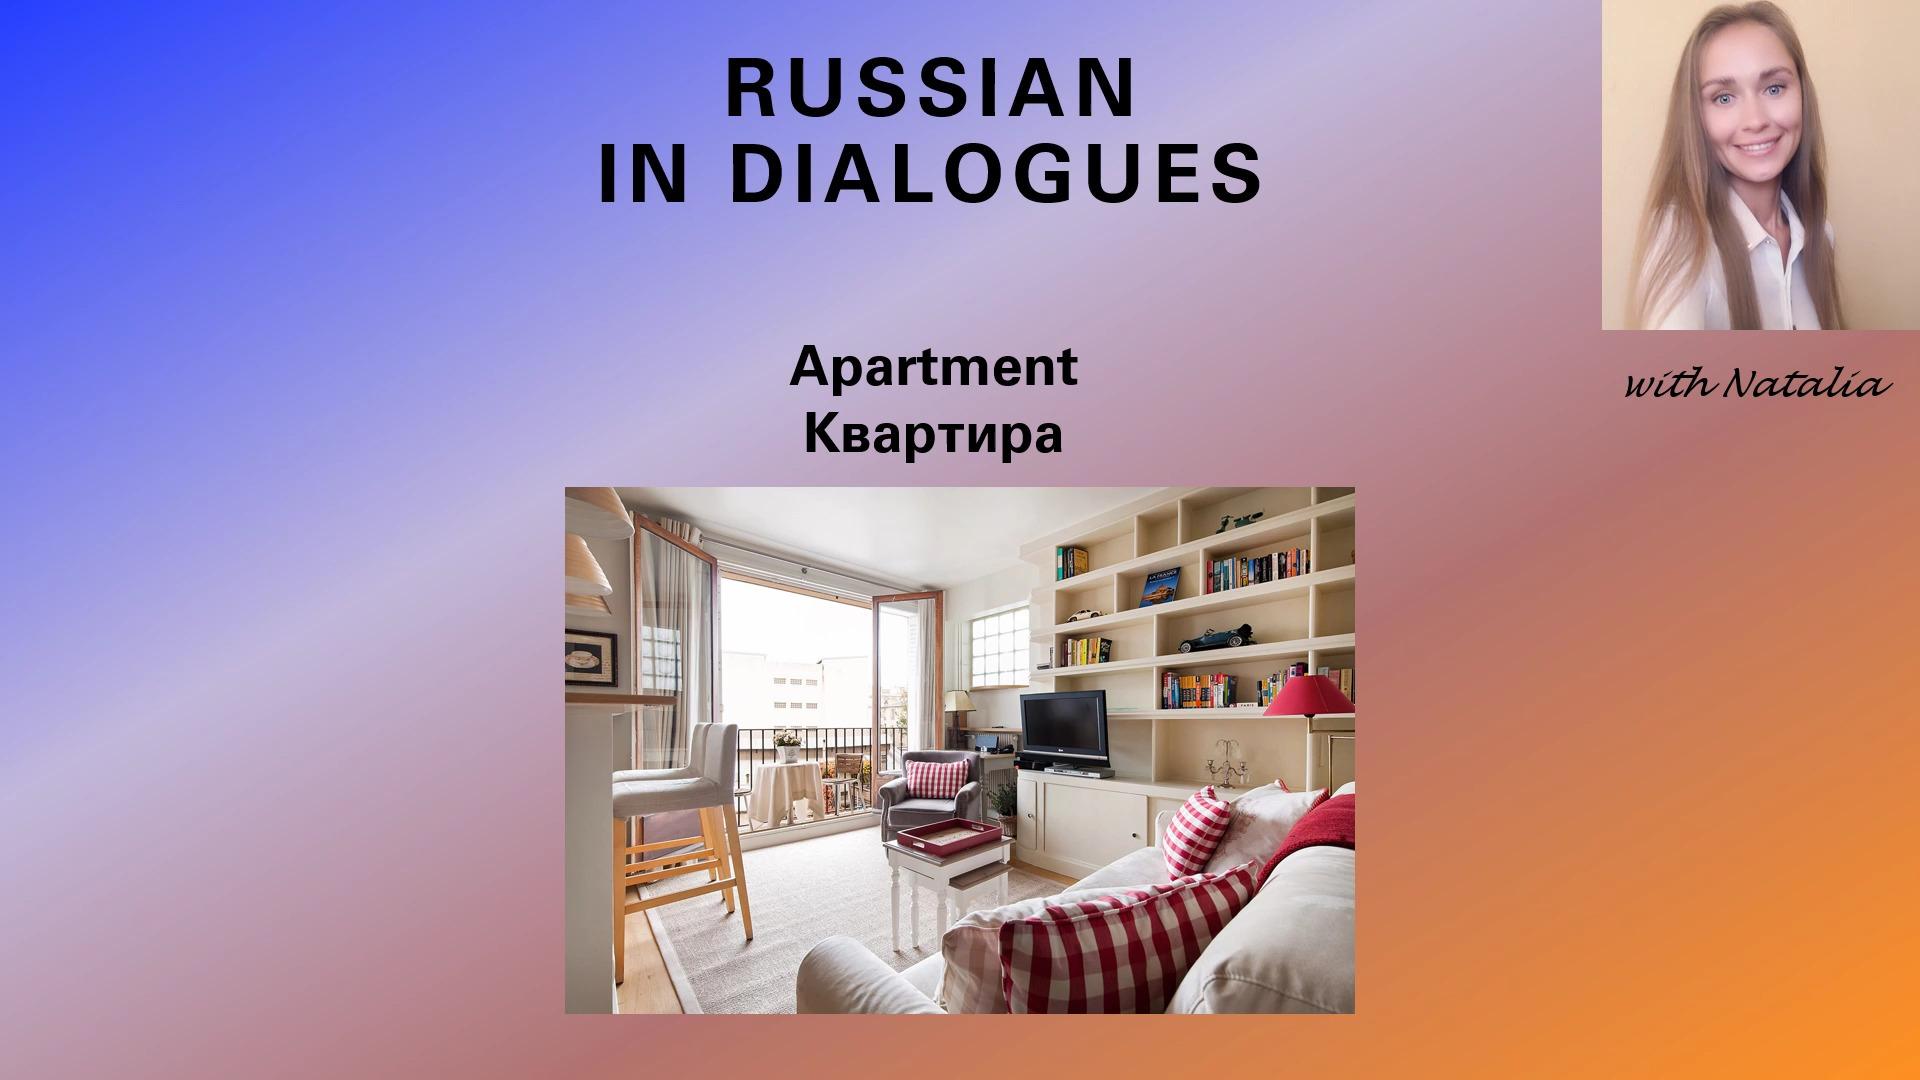 Russian in dialogues with Natalia: apartment